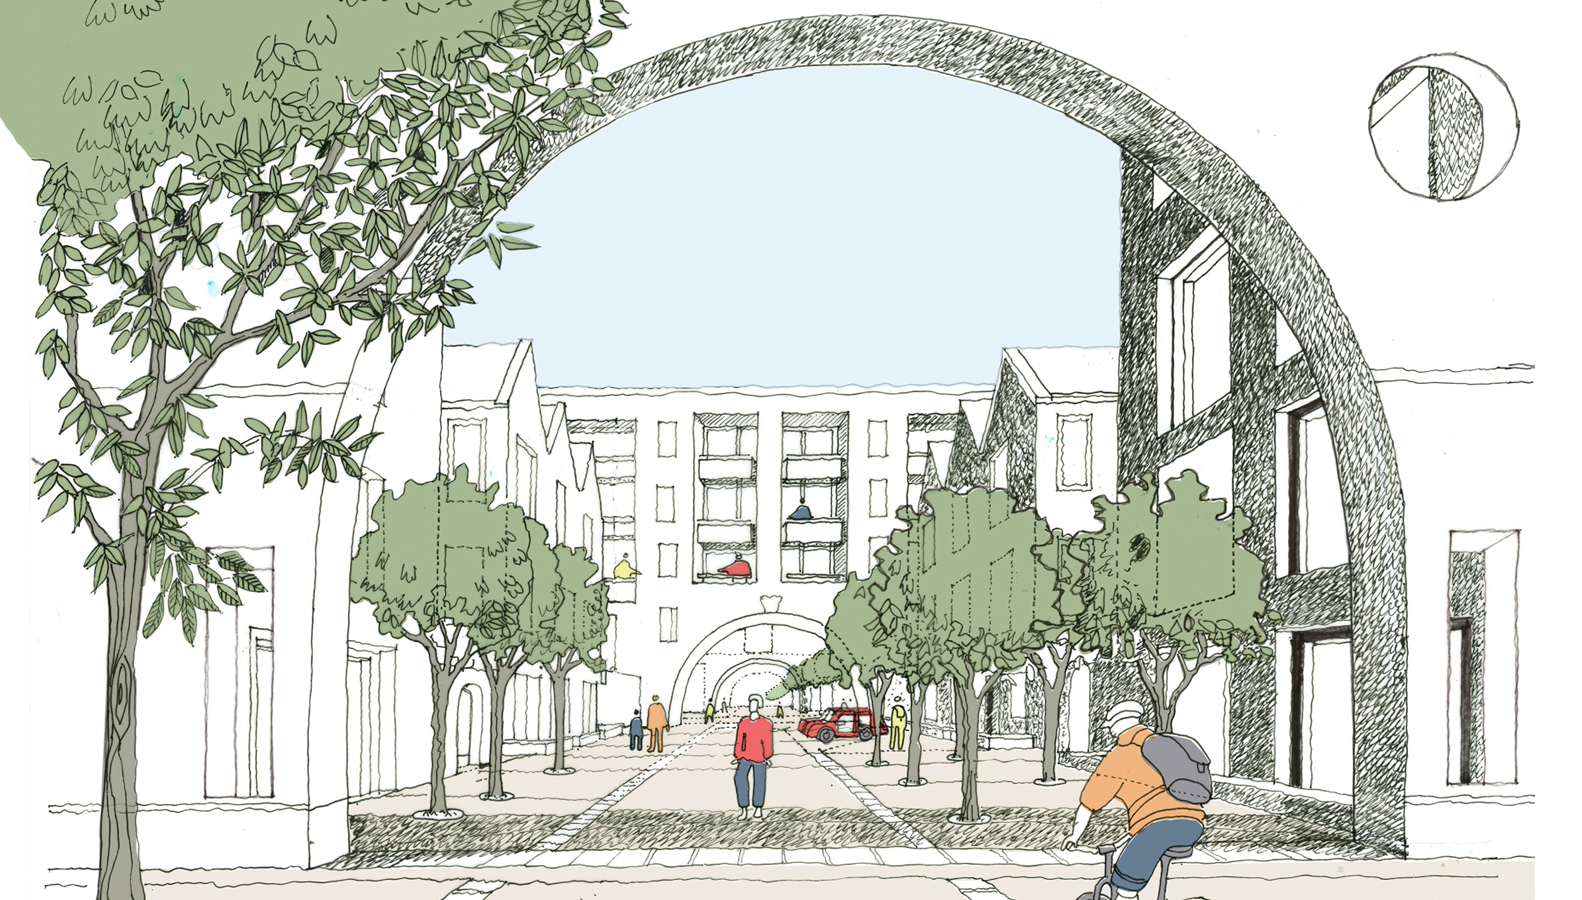 Carpenters Estate renewal given green light in residents ballot